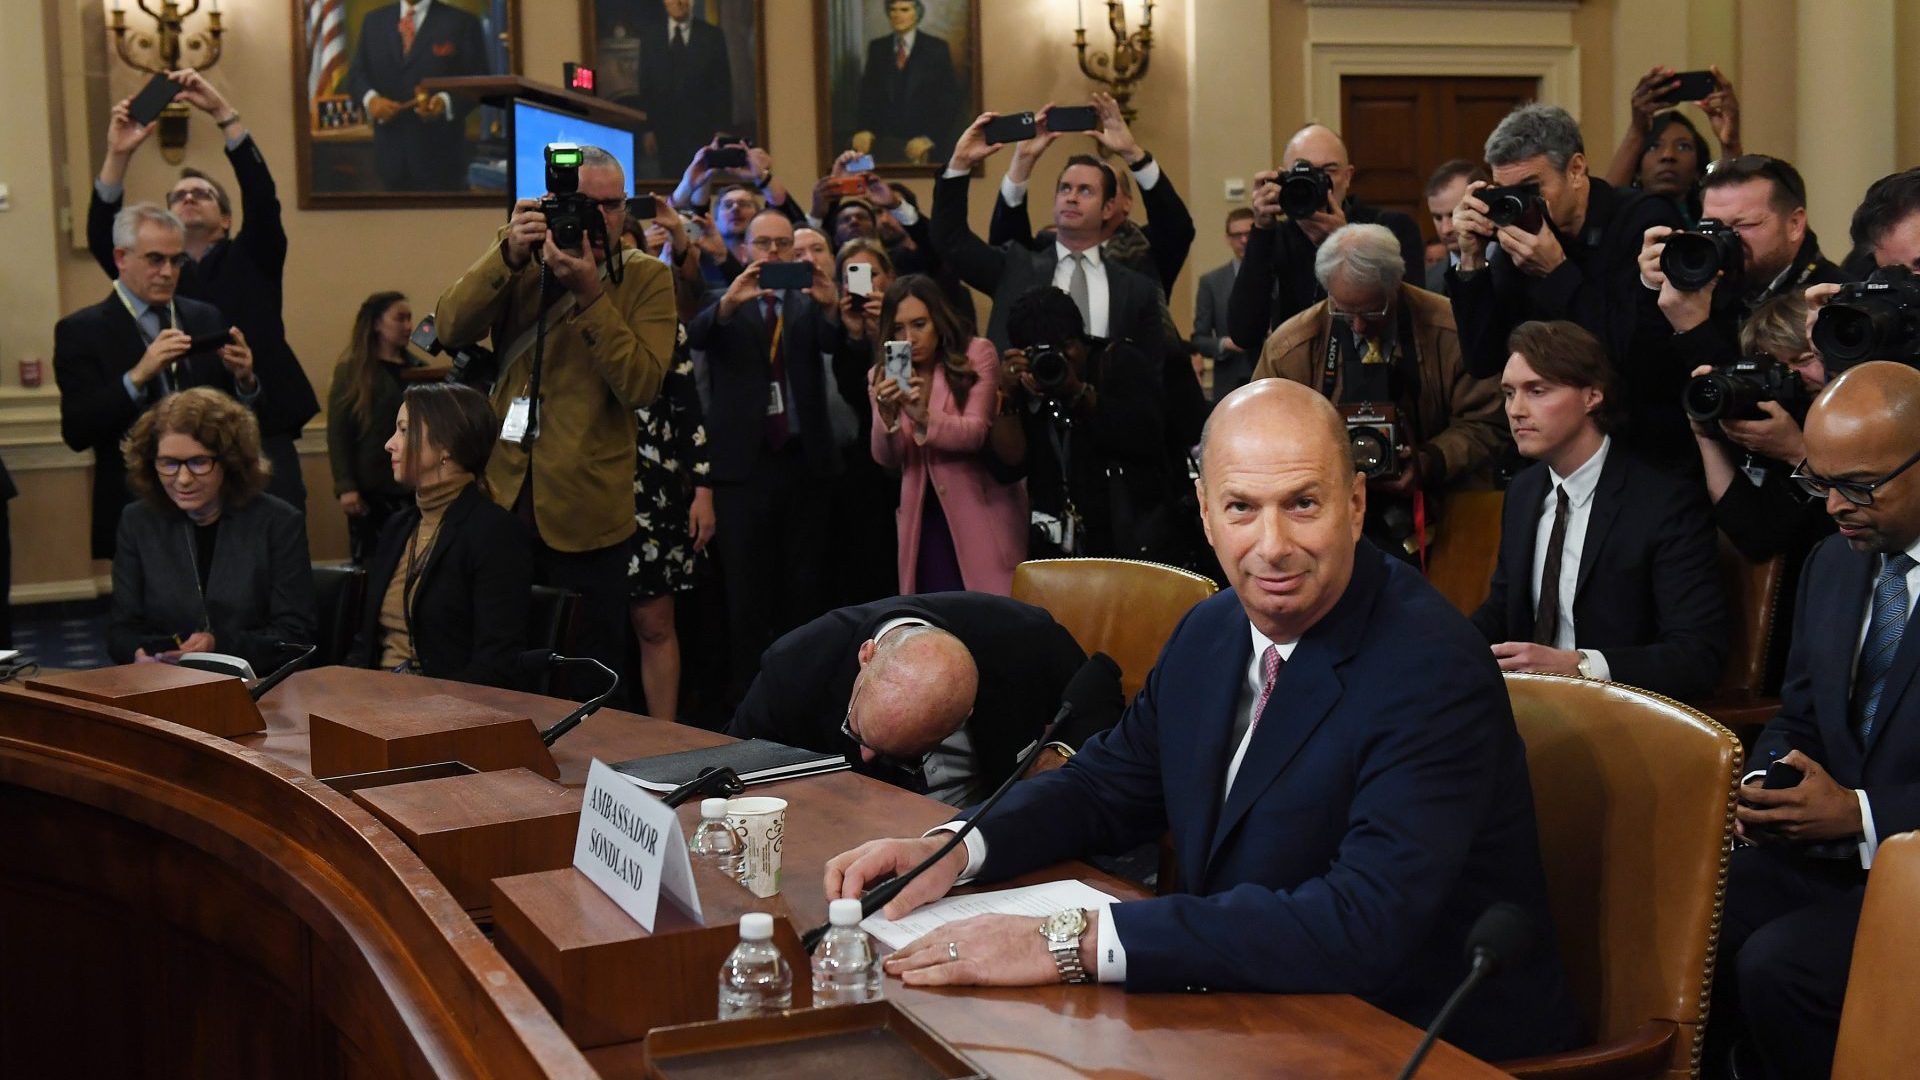 U.S. Ambassador to the European Union, Gordon Sondland appears before the House Intelligence Committee during an impeachment hearing in 2019. Photo: Matt McClain/The Washington Post via Getty Images